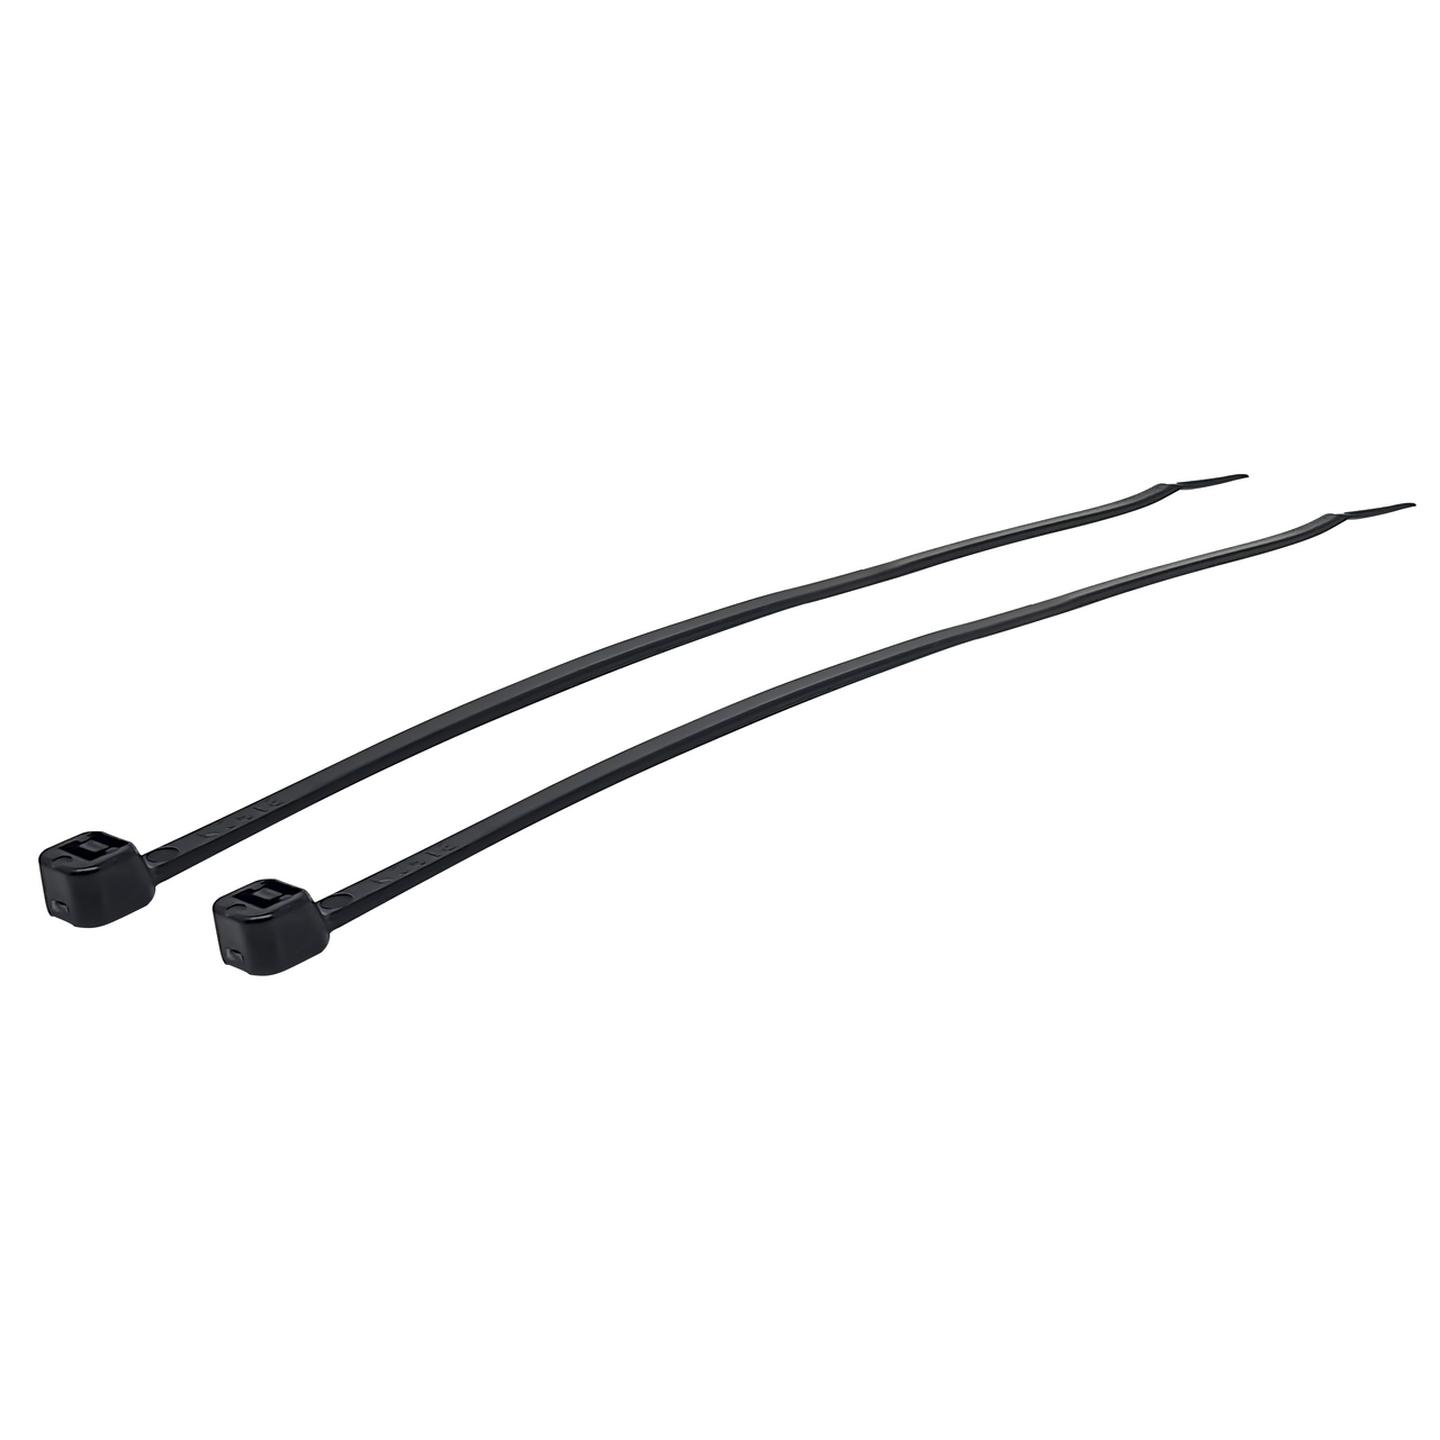 200mm Black Cable Ties - Pack of 15